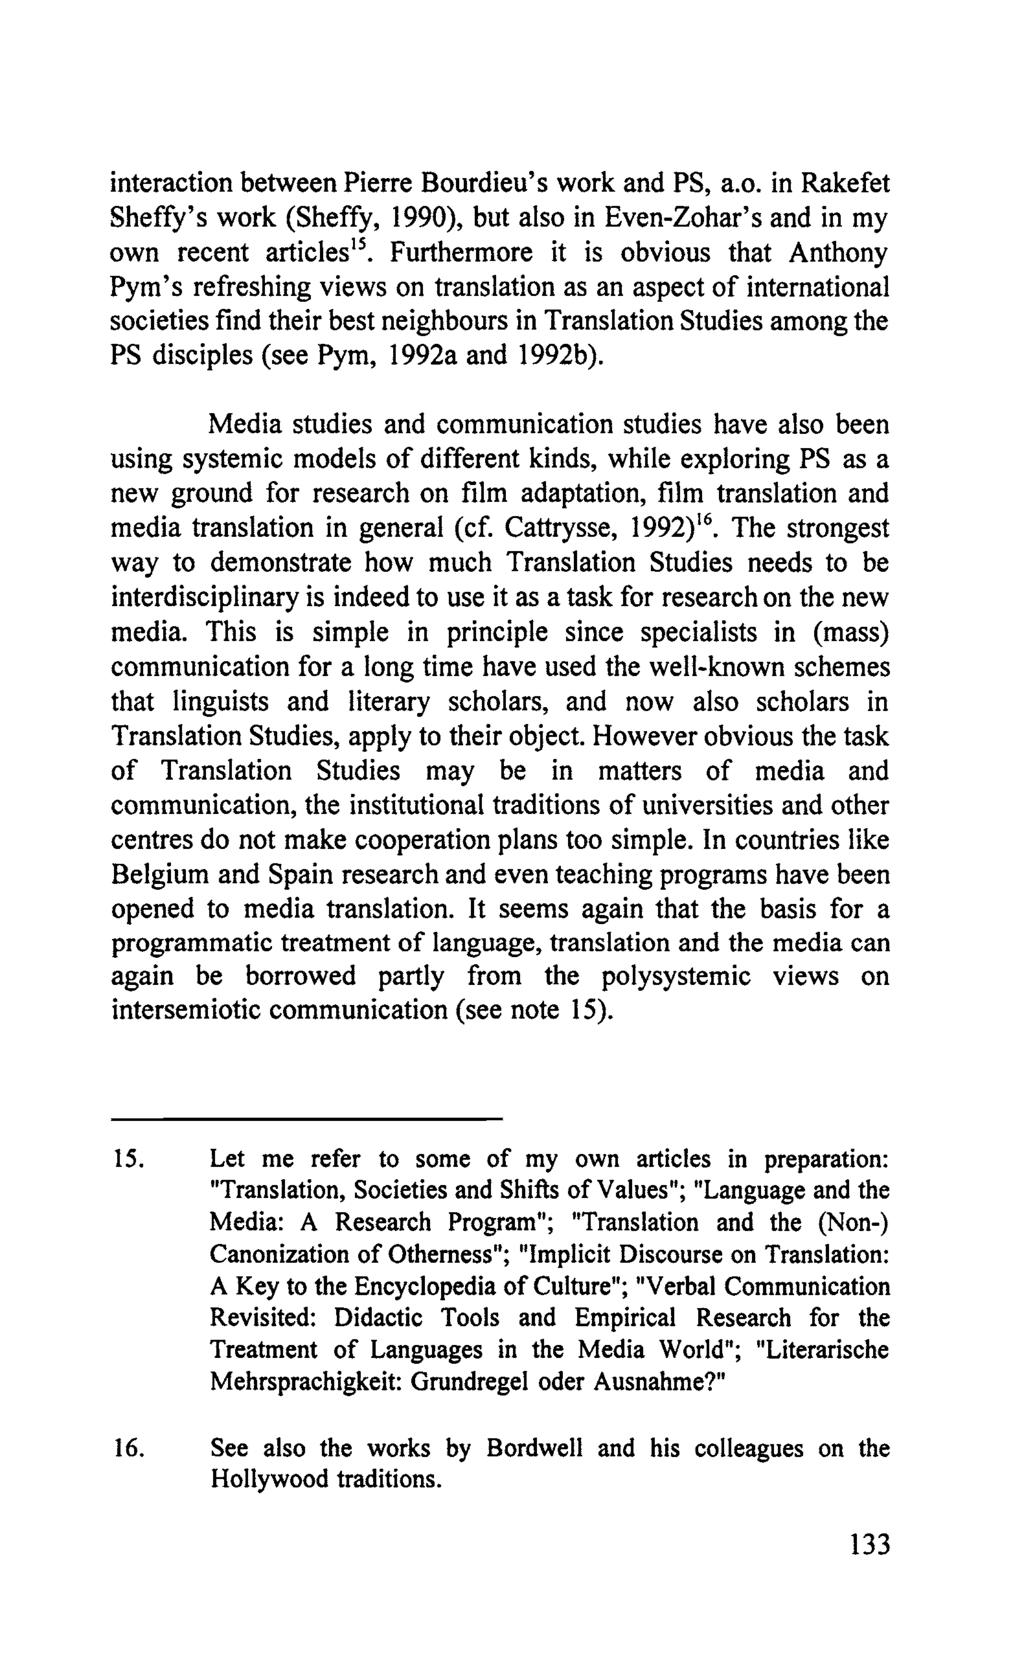 interaction between Pierre Bourdieu's work and PS, a.o. in Rakefet Sheffy's work (Sheffy, 1990), but also in Even-Zohar's and in my own recent articles 15.